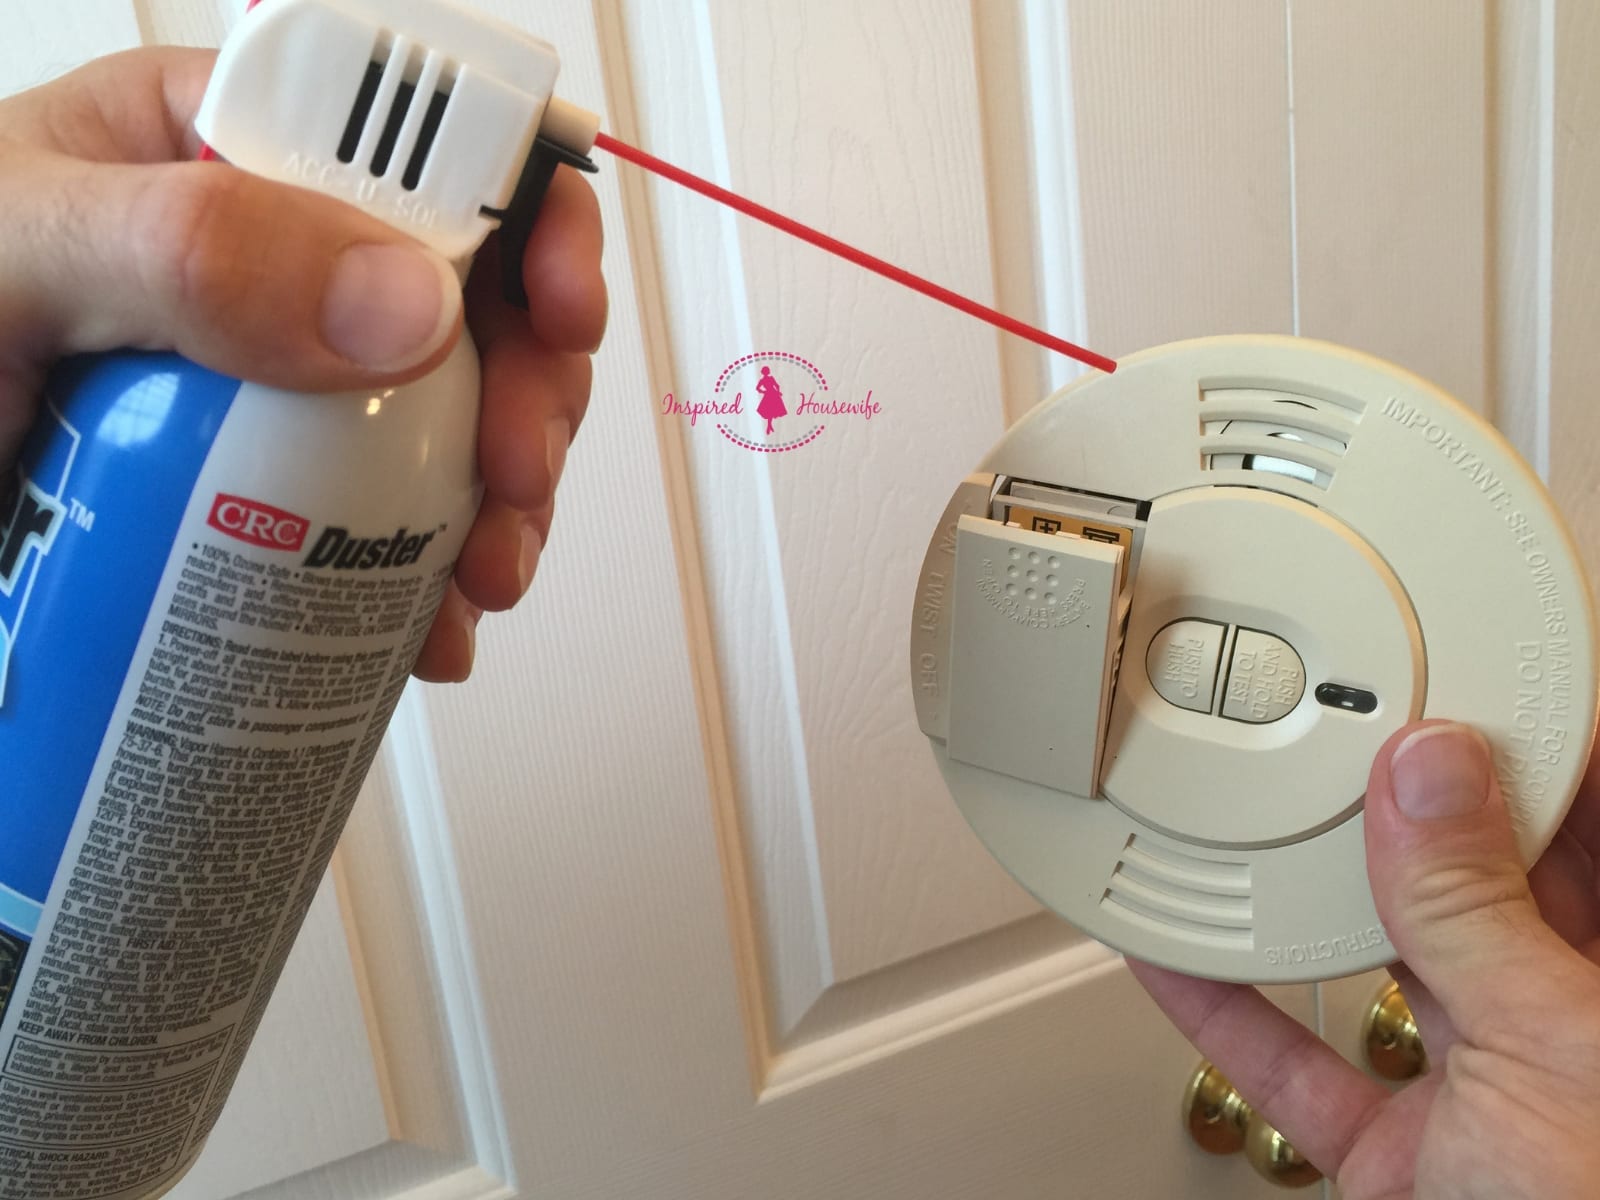 How To Turn Off Smoke Detector How to Easily Stop Smoke Detector Beeping or Chirping | Inspired Housewife